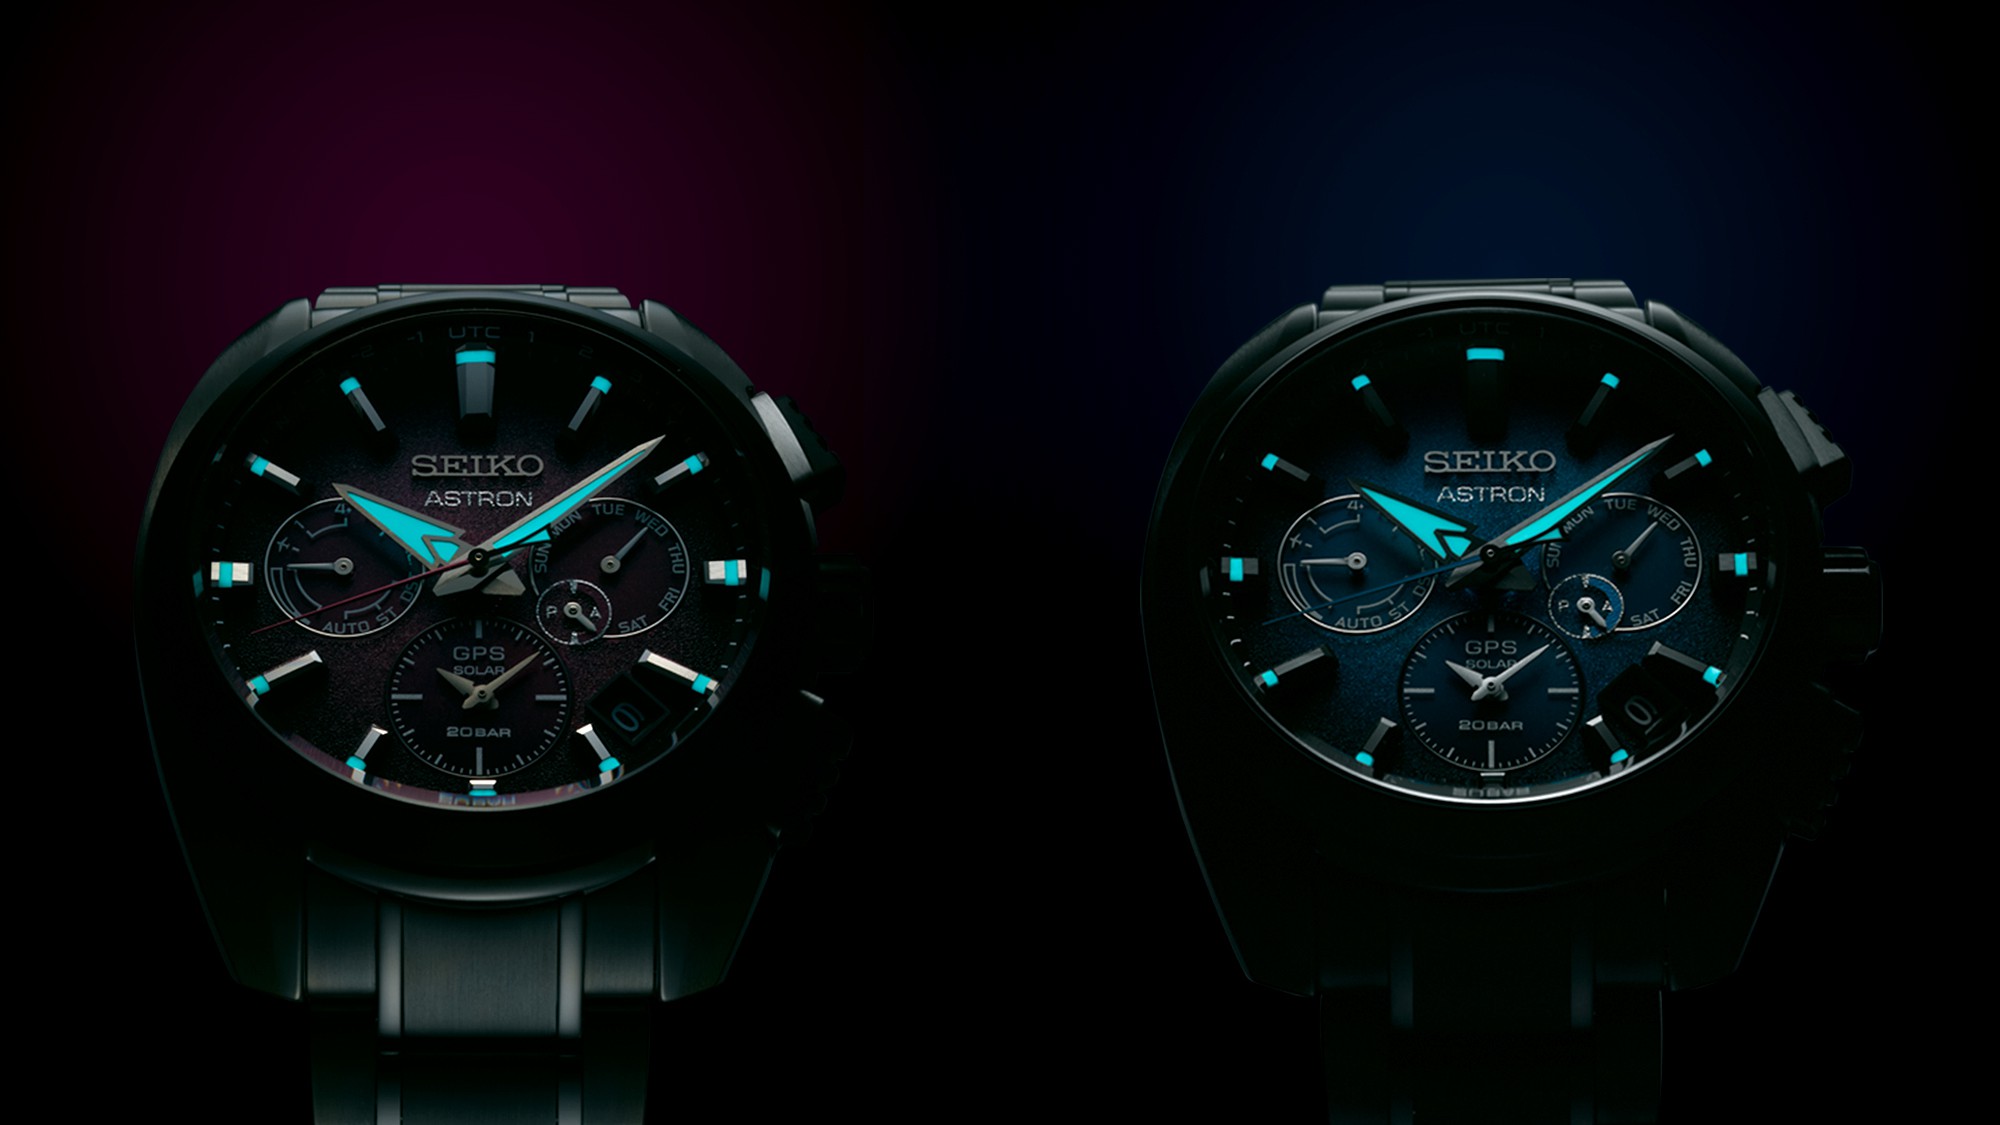 The Astron GPS Solar 2021 Limited Edition | Seiko Watch Corporation